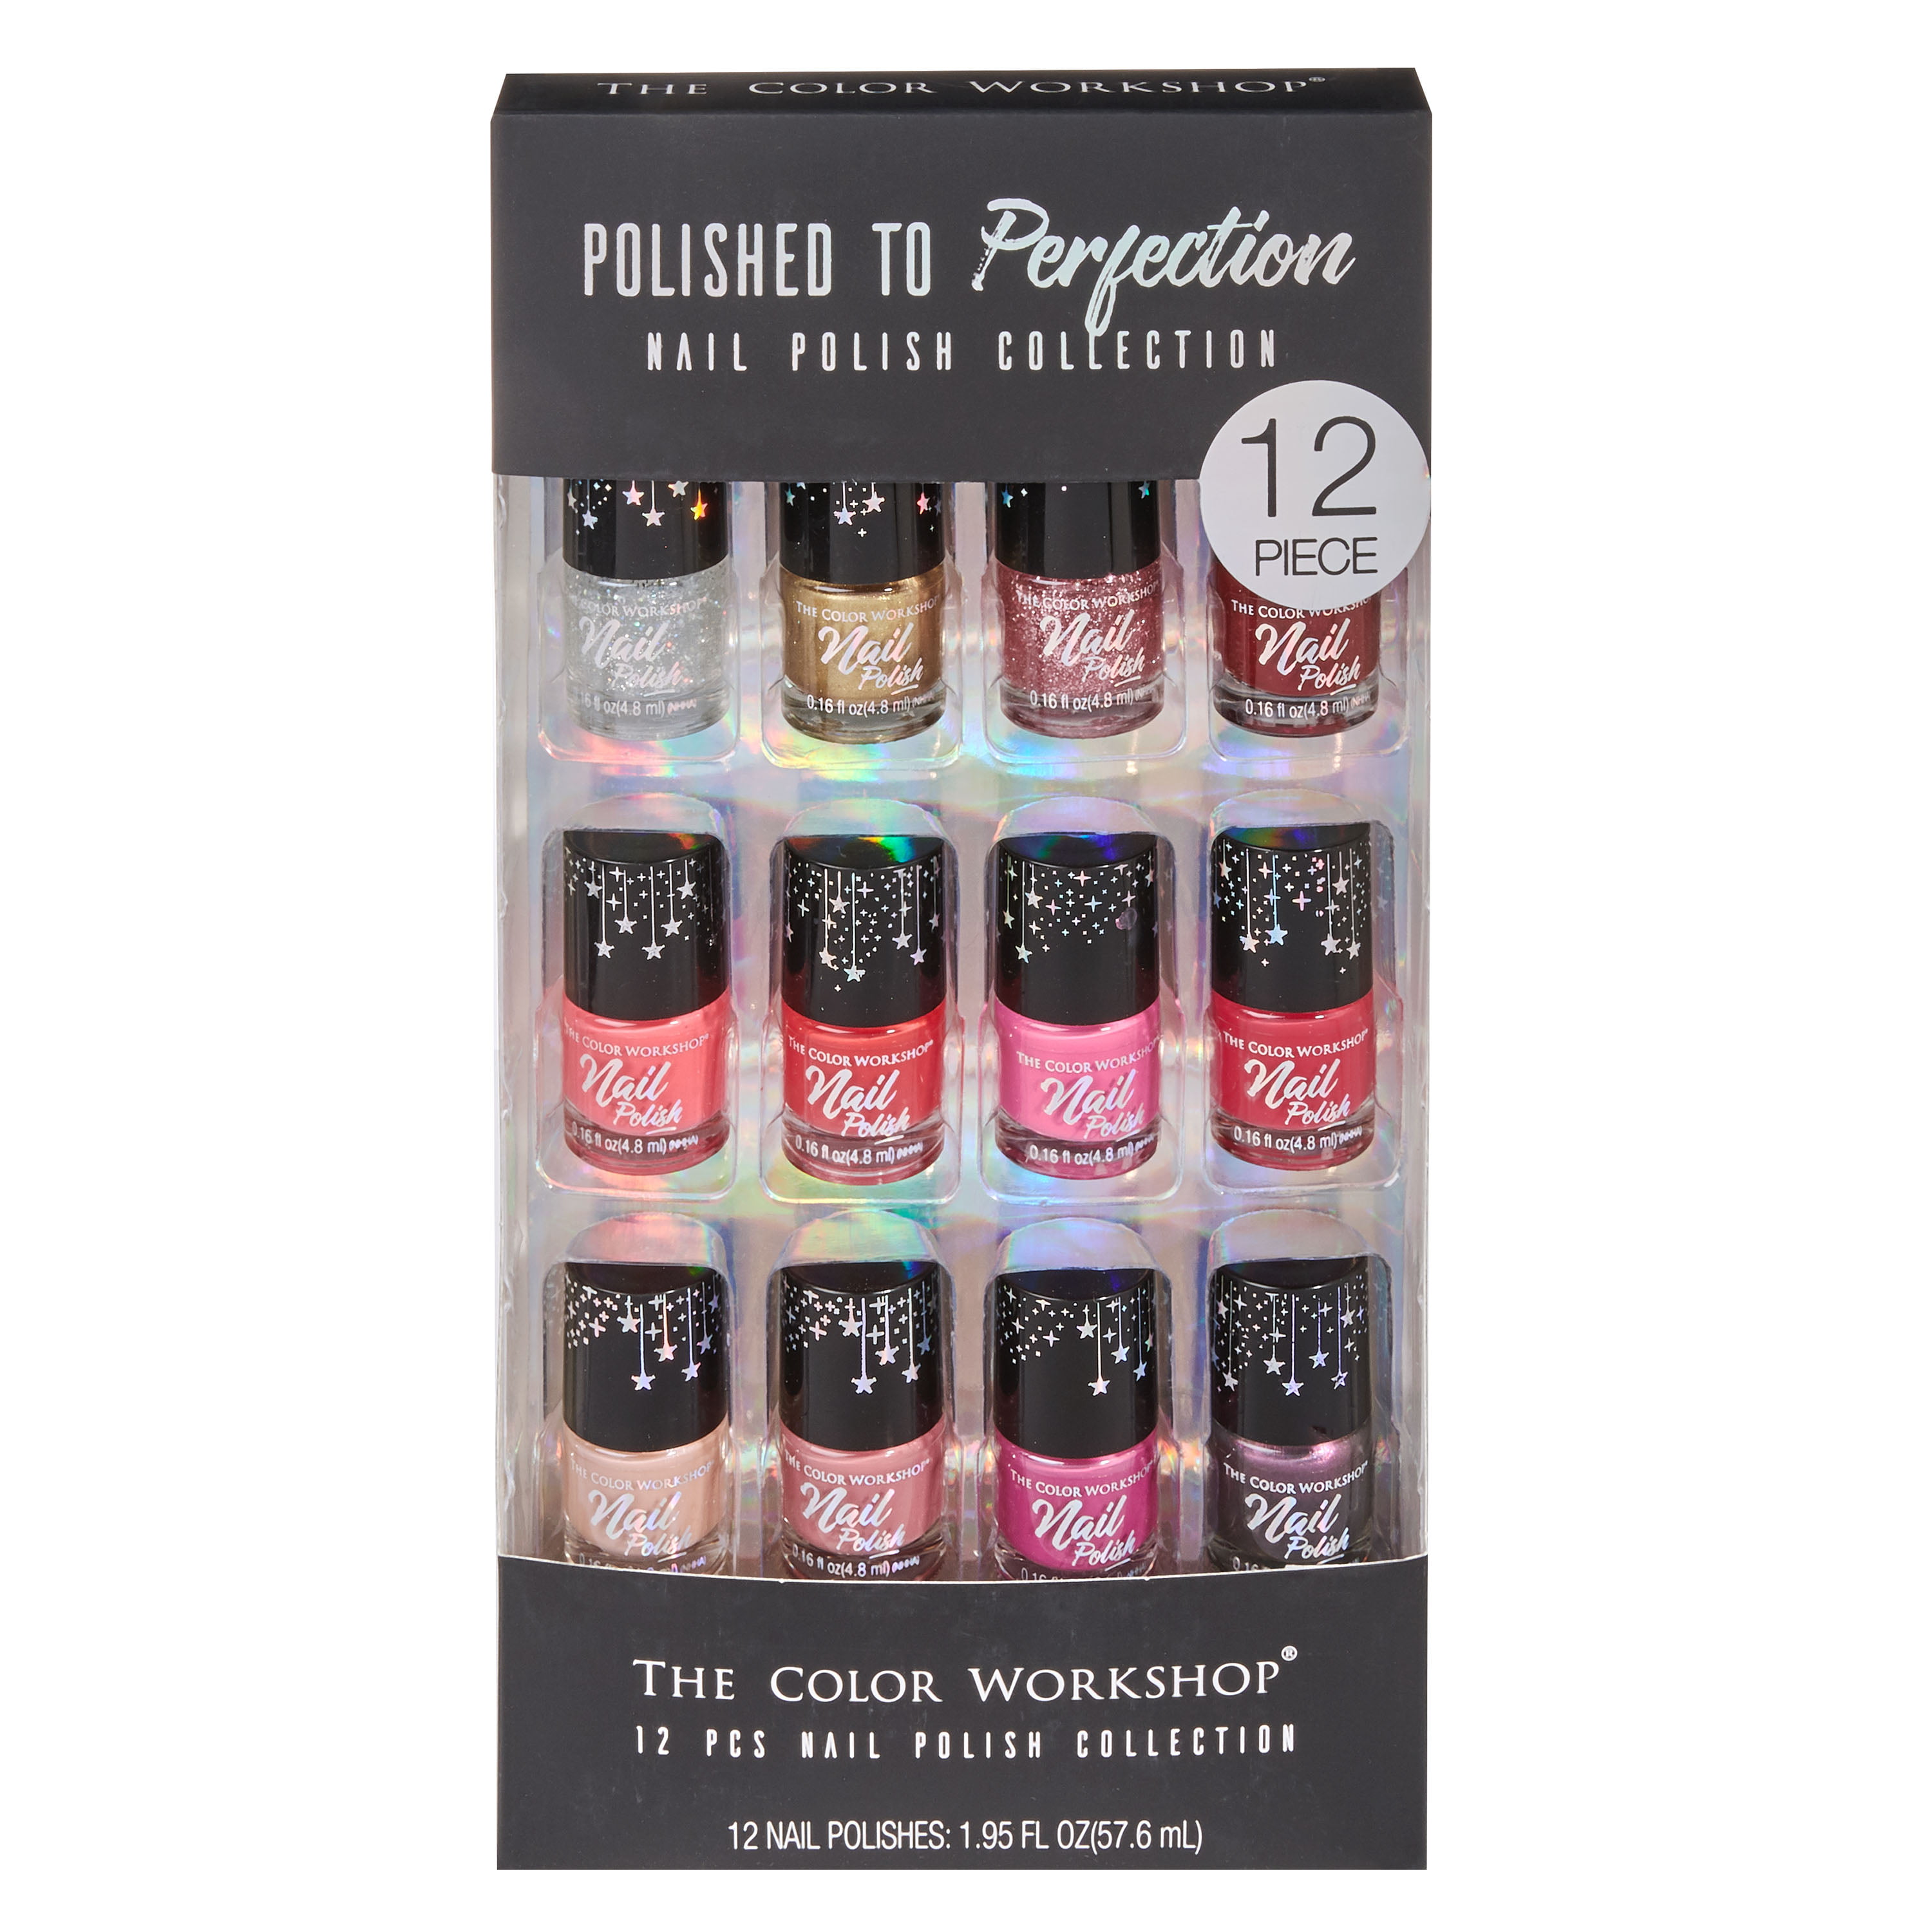 The Color Workshop Polished To Perfection Nail Polish Collection, 12 Piece  